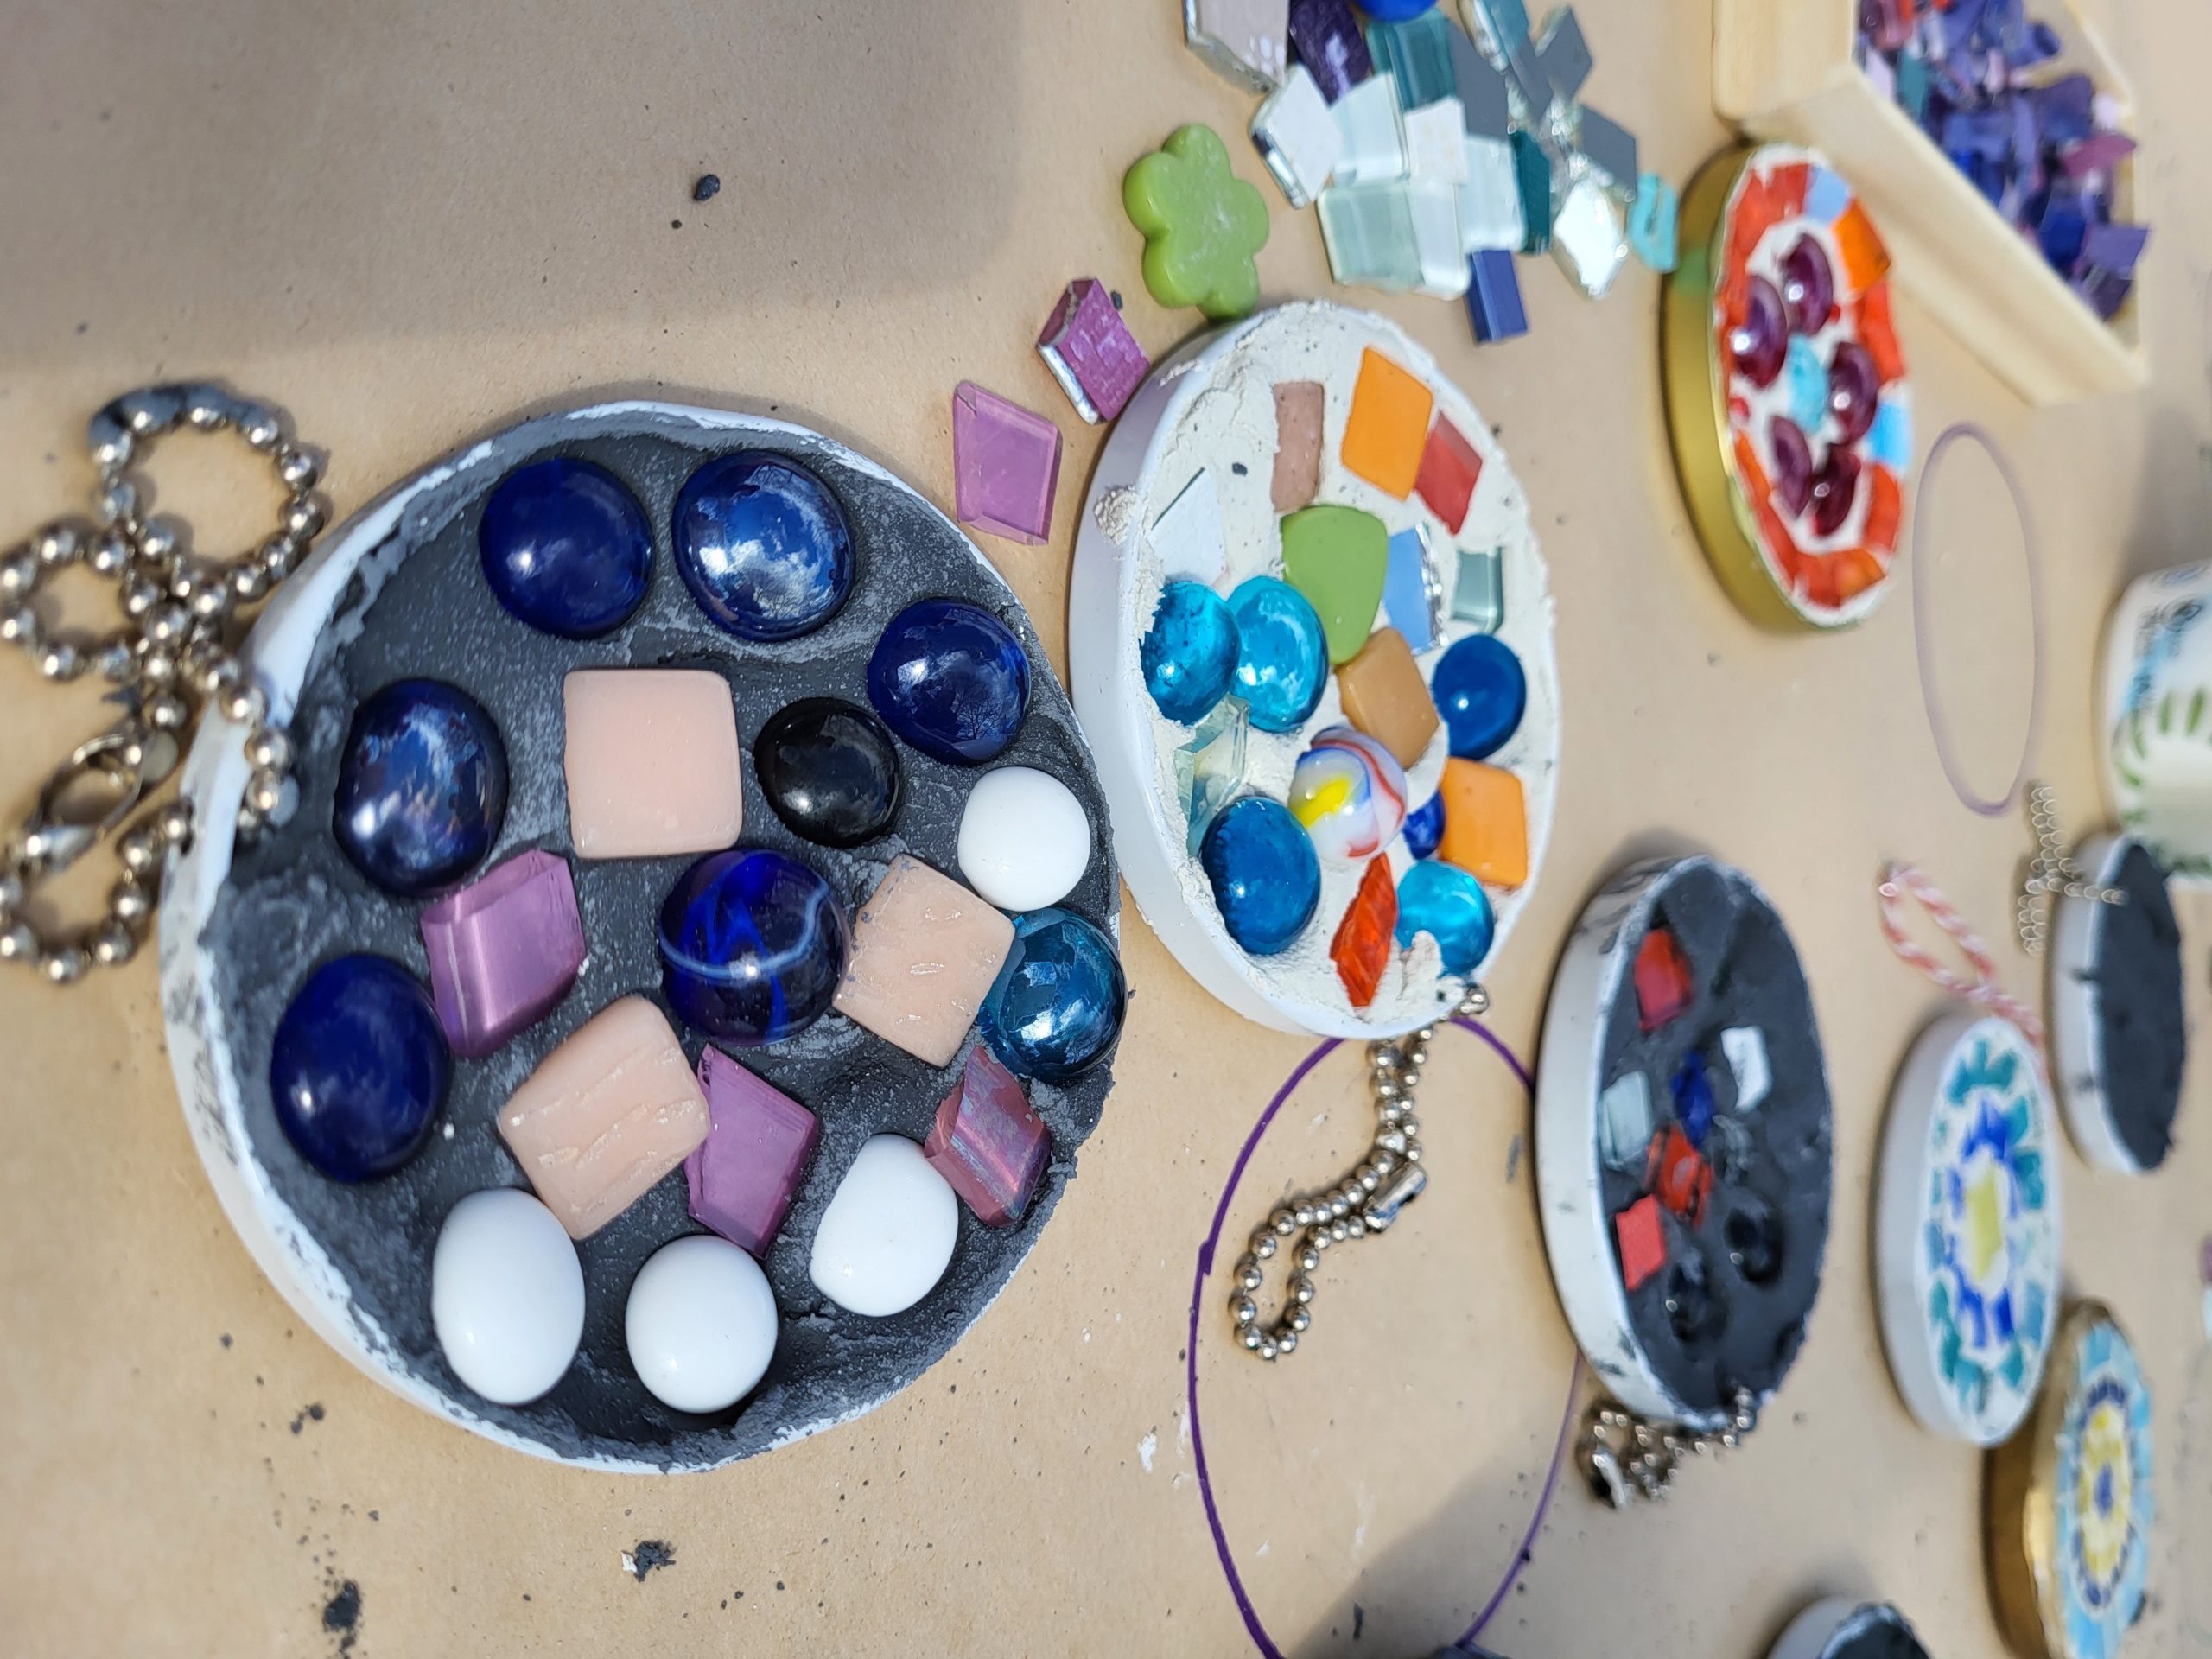 Workshop materials for a mosaic workshop with colourful beads and tiles on kraft paper